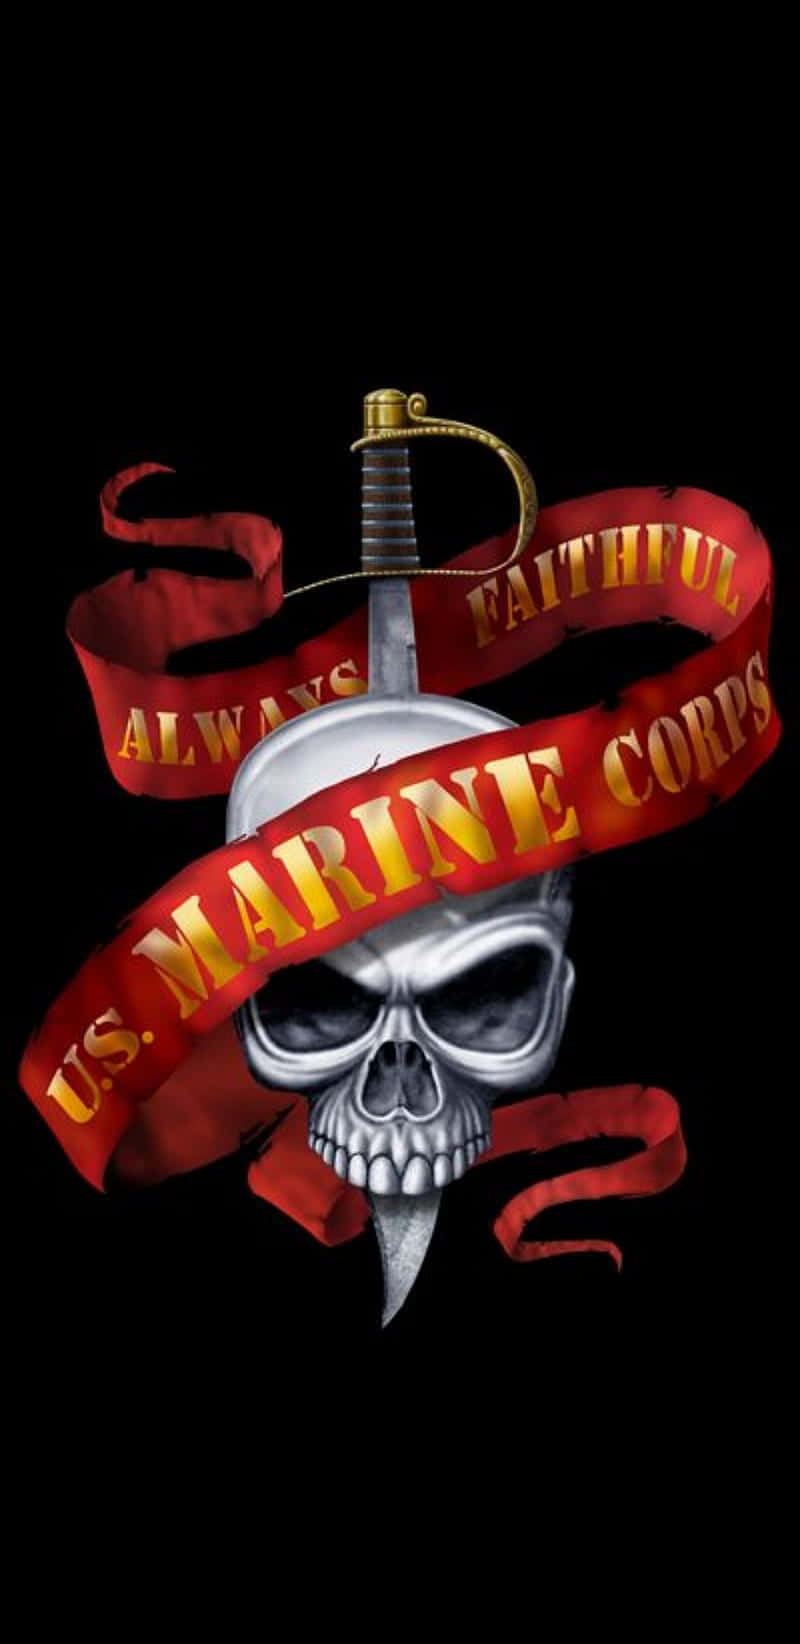 A United States Marine Corps Phone Wallpaper